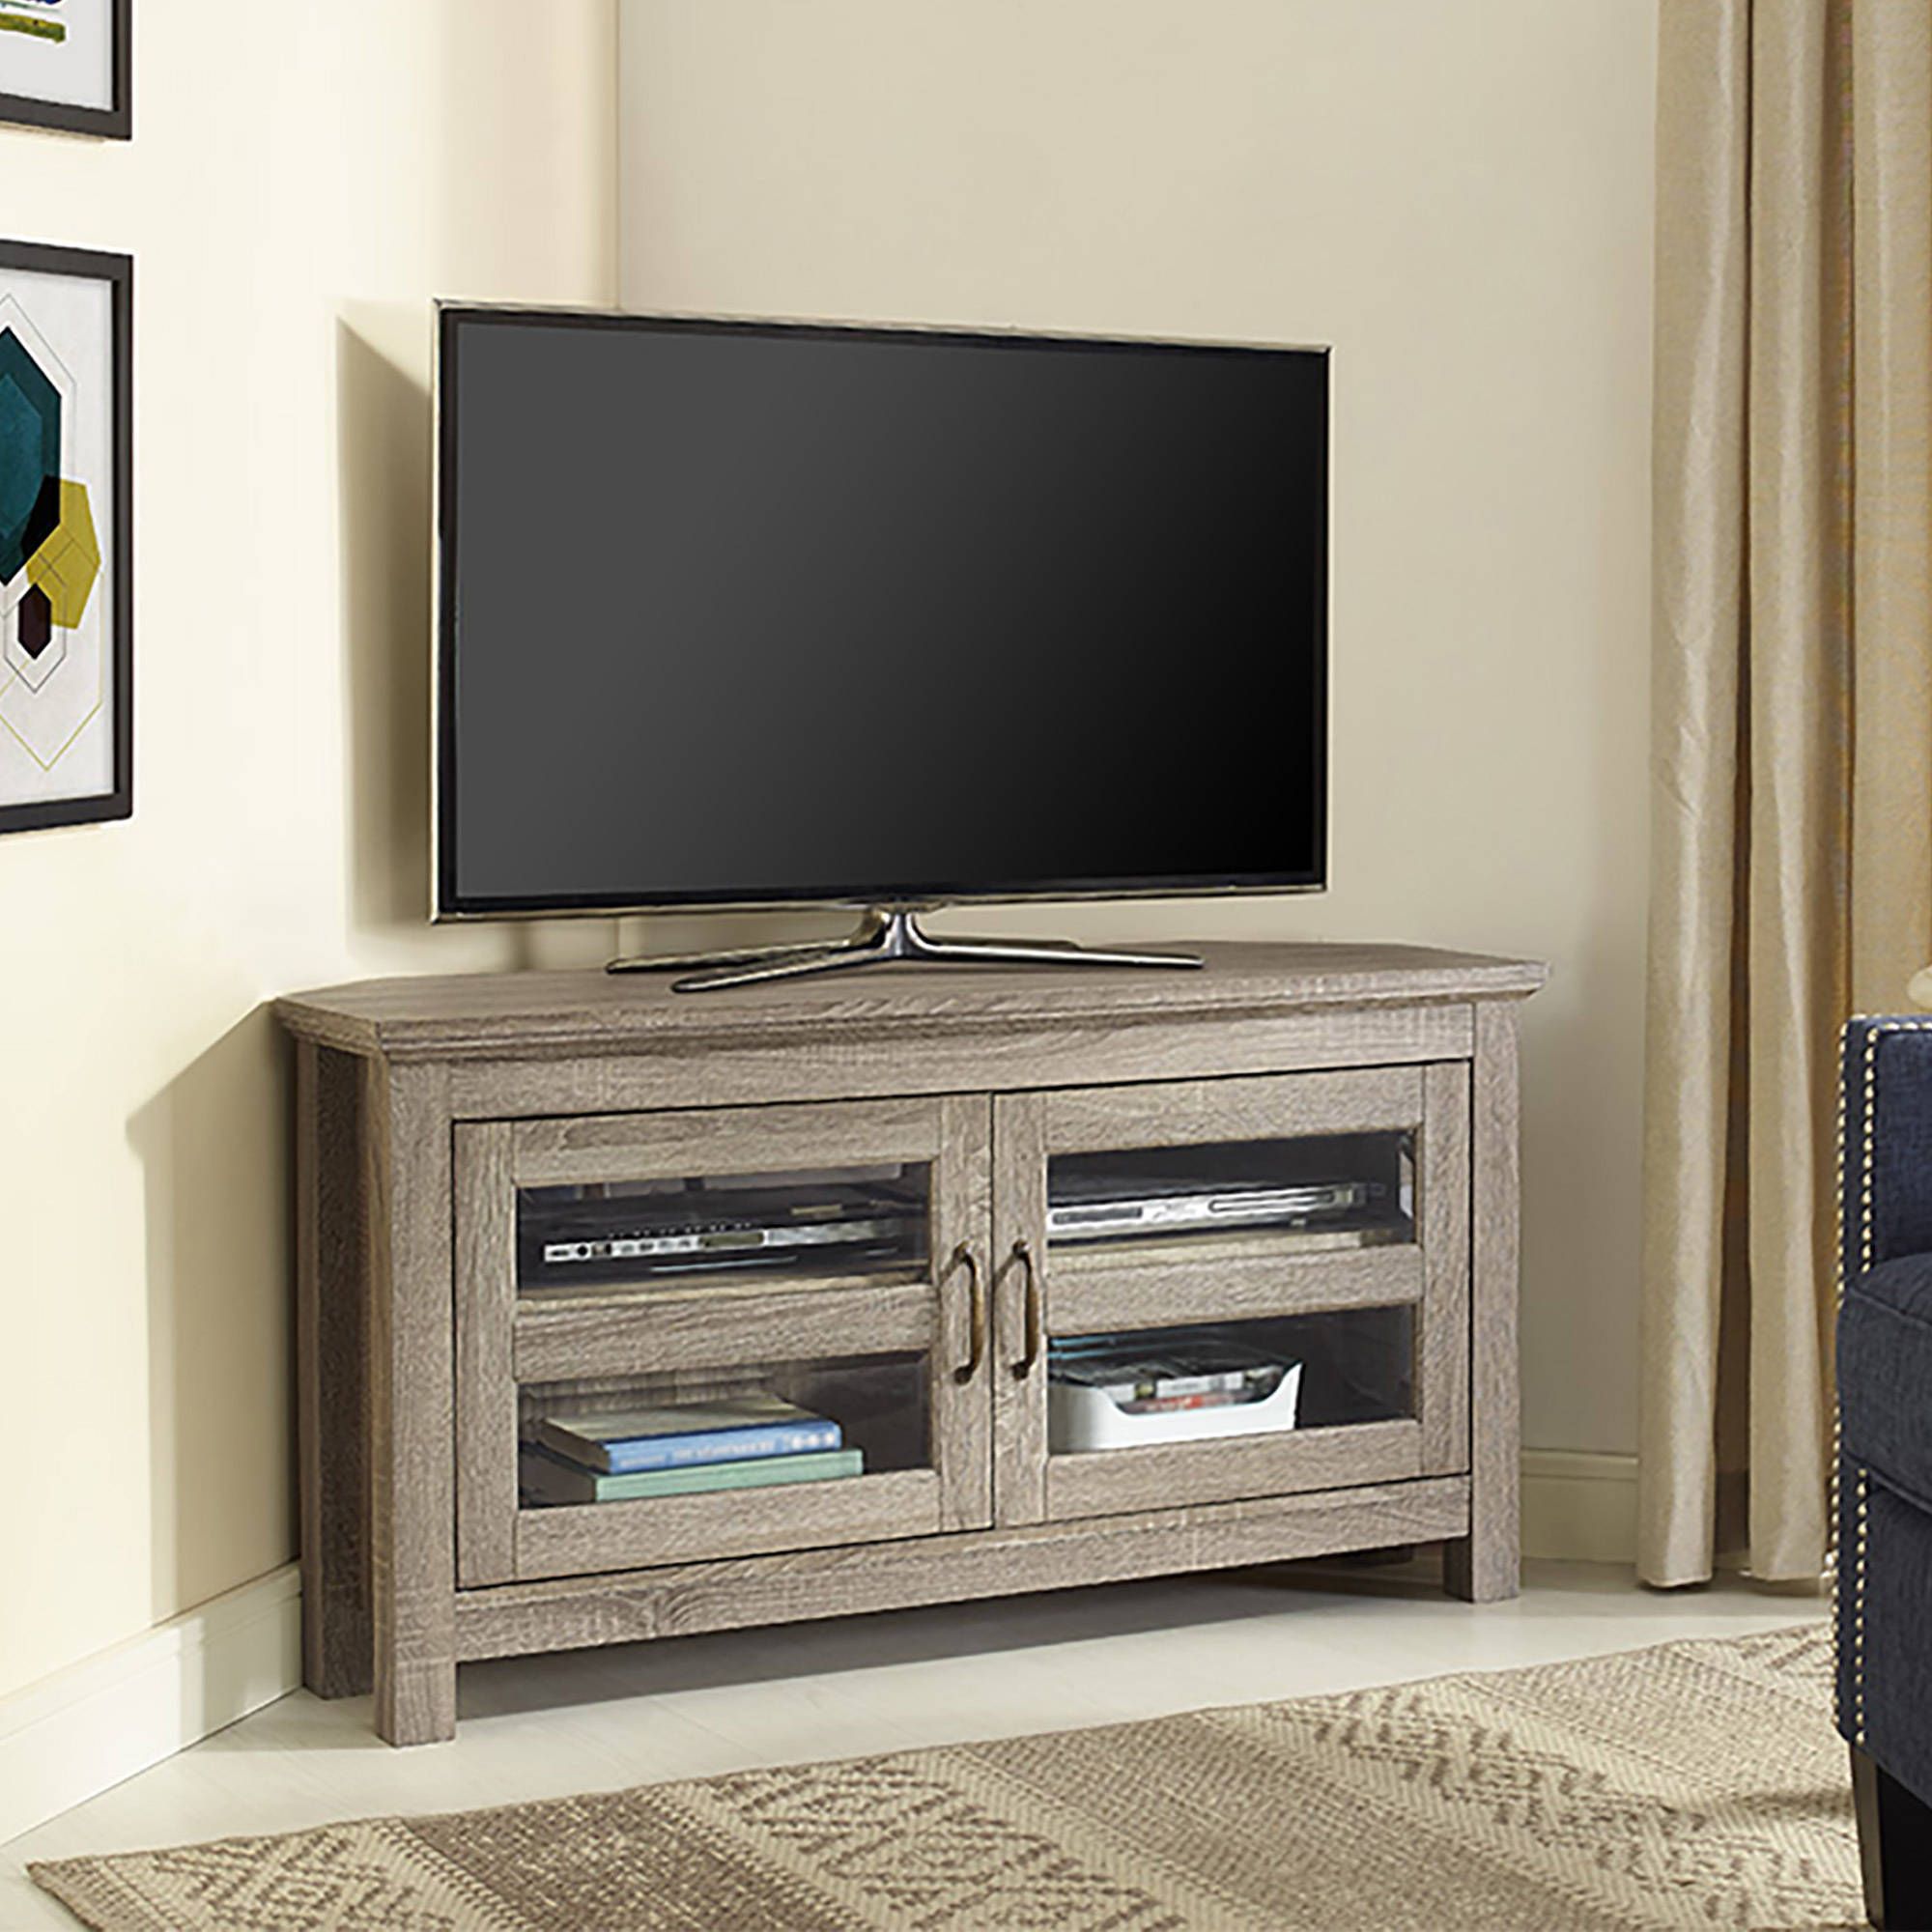 Tv Stands For Corners In Best And Newest Tv Stand With Mount Corner Stands Wood Armoire Flat Panel Fireplace (View 11 of 20)